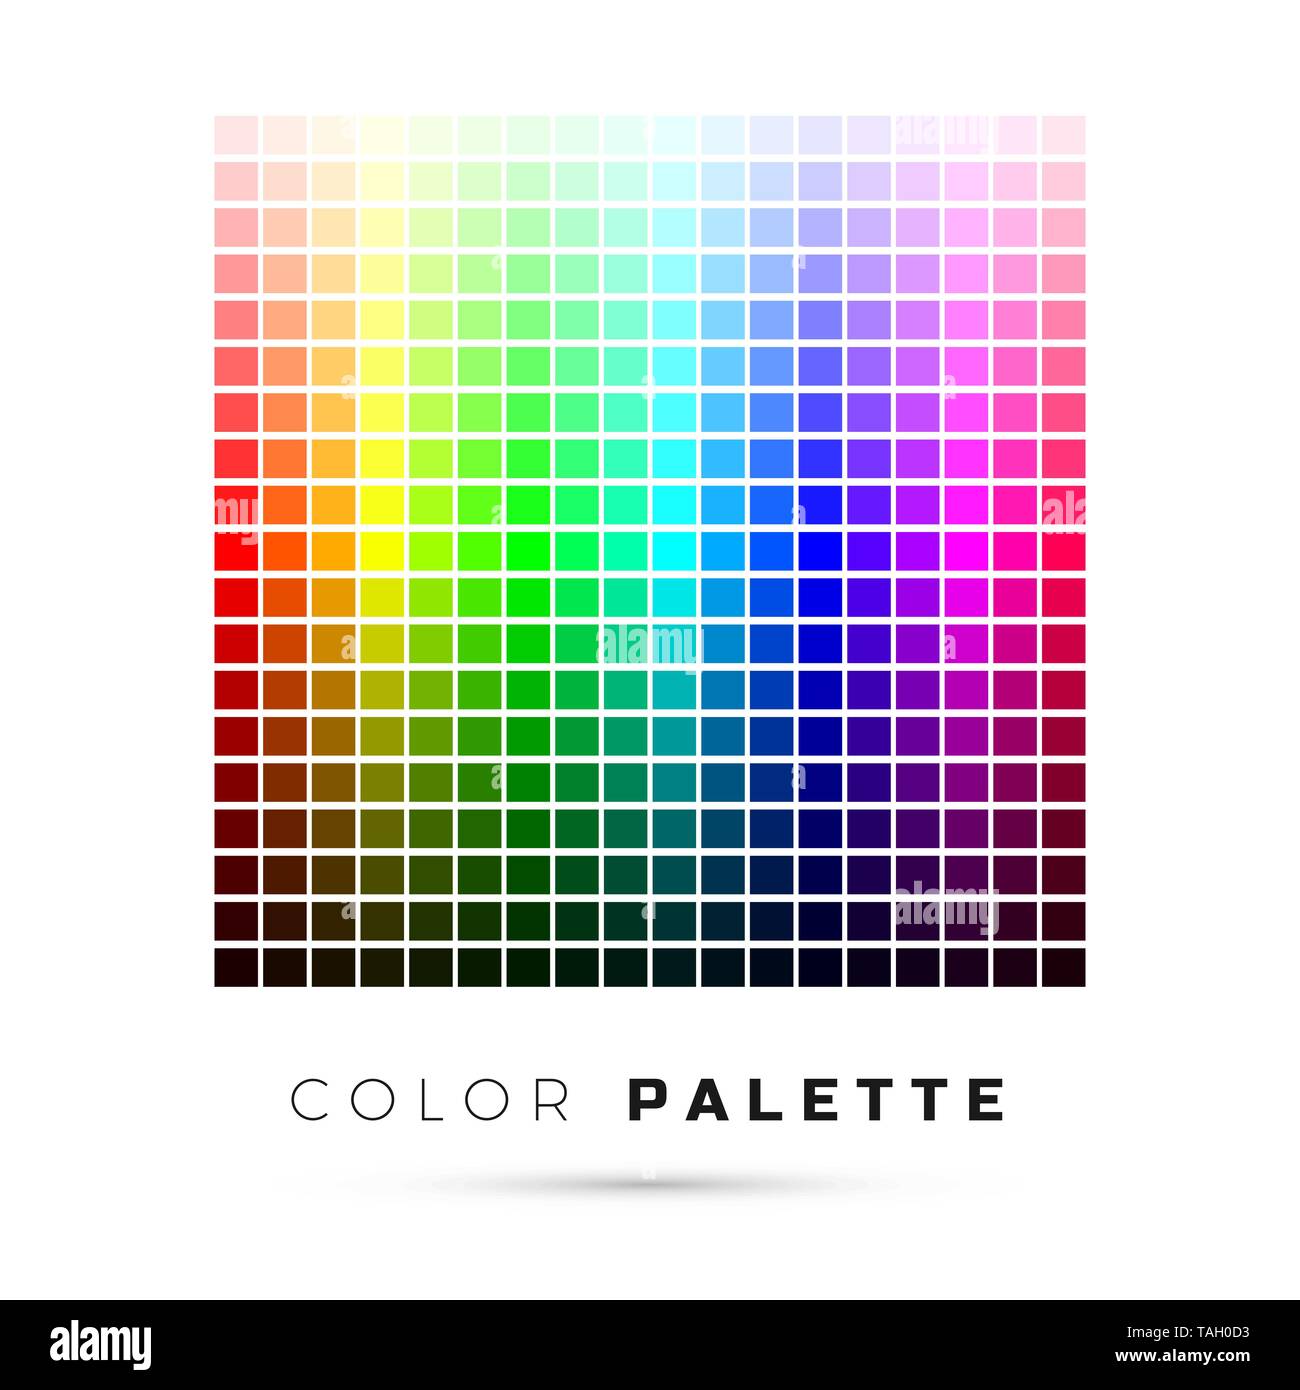 Colorful palette. Set of bright colors of rainbow palette. Full spectrum of colors. Vector illustration Stock Vector